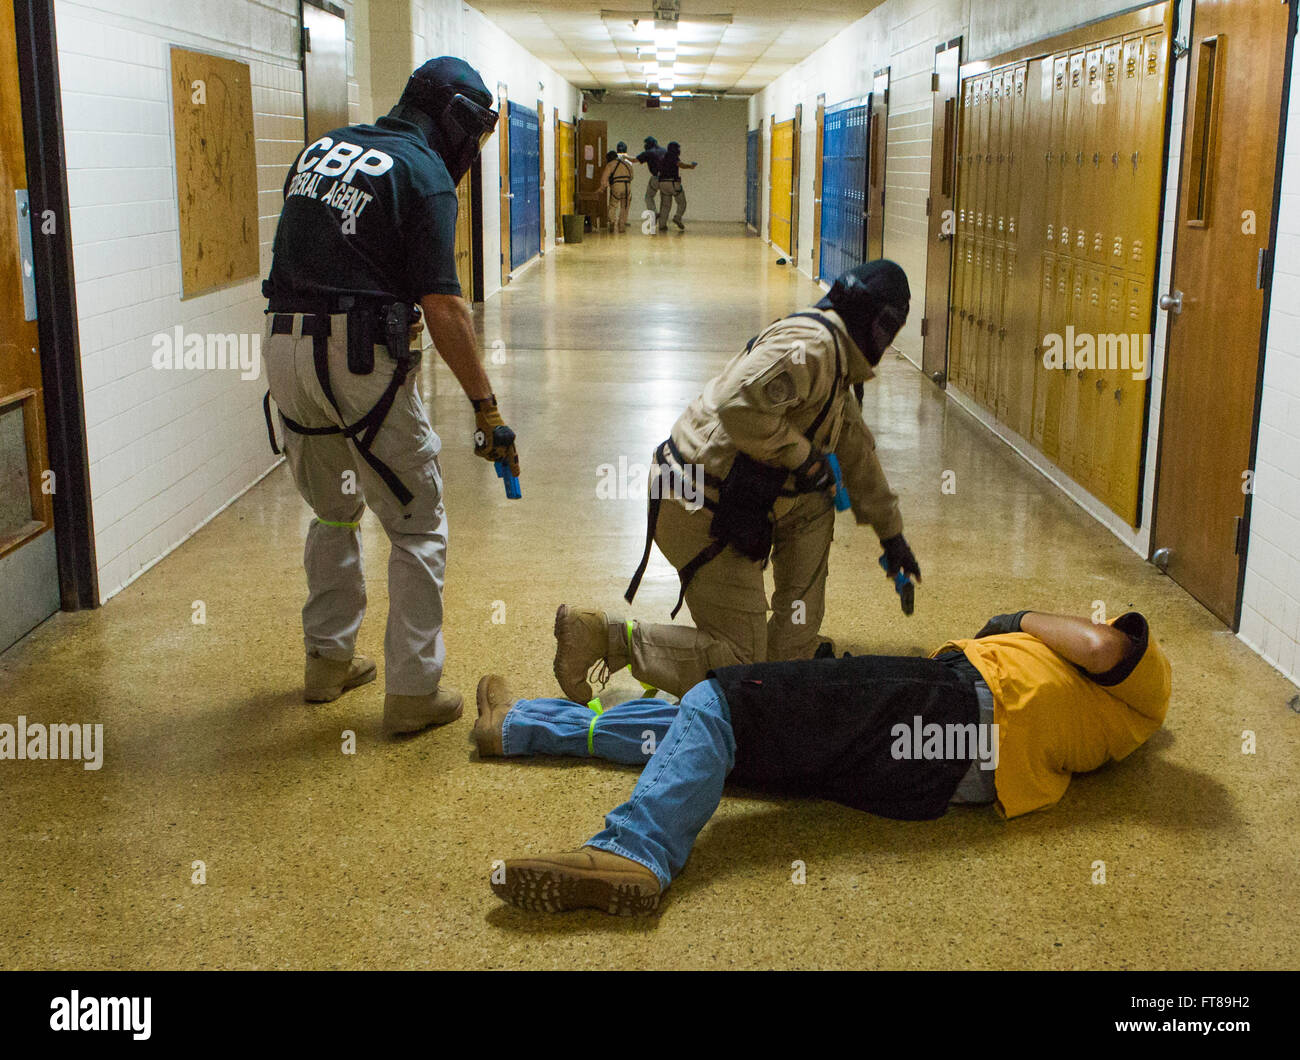 CBP Office of Air and Marine Pilots participate in an Active Shooter Scenario at an NATC facility to learn how to safely interact with other law enforcement communities in a dynamic enviroment to protect citizens and neutralize threats in a school based situation. Students and instructors move thru an abandoned school checking the role playing bad guy, removing his weapon, while training for the Active Shooter Scenario making sure to wear important safety equipment. Photo by James Tourtellotte Stock Photo